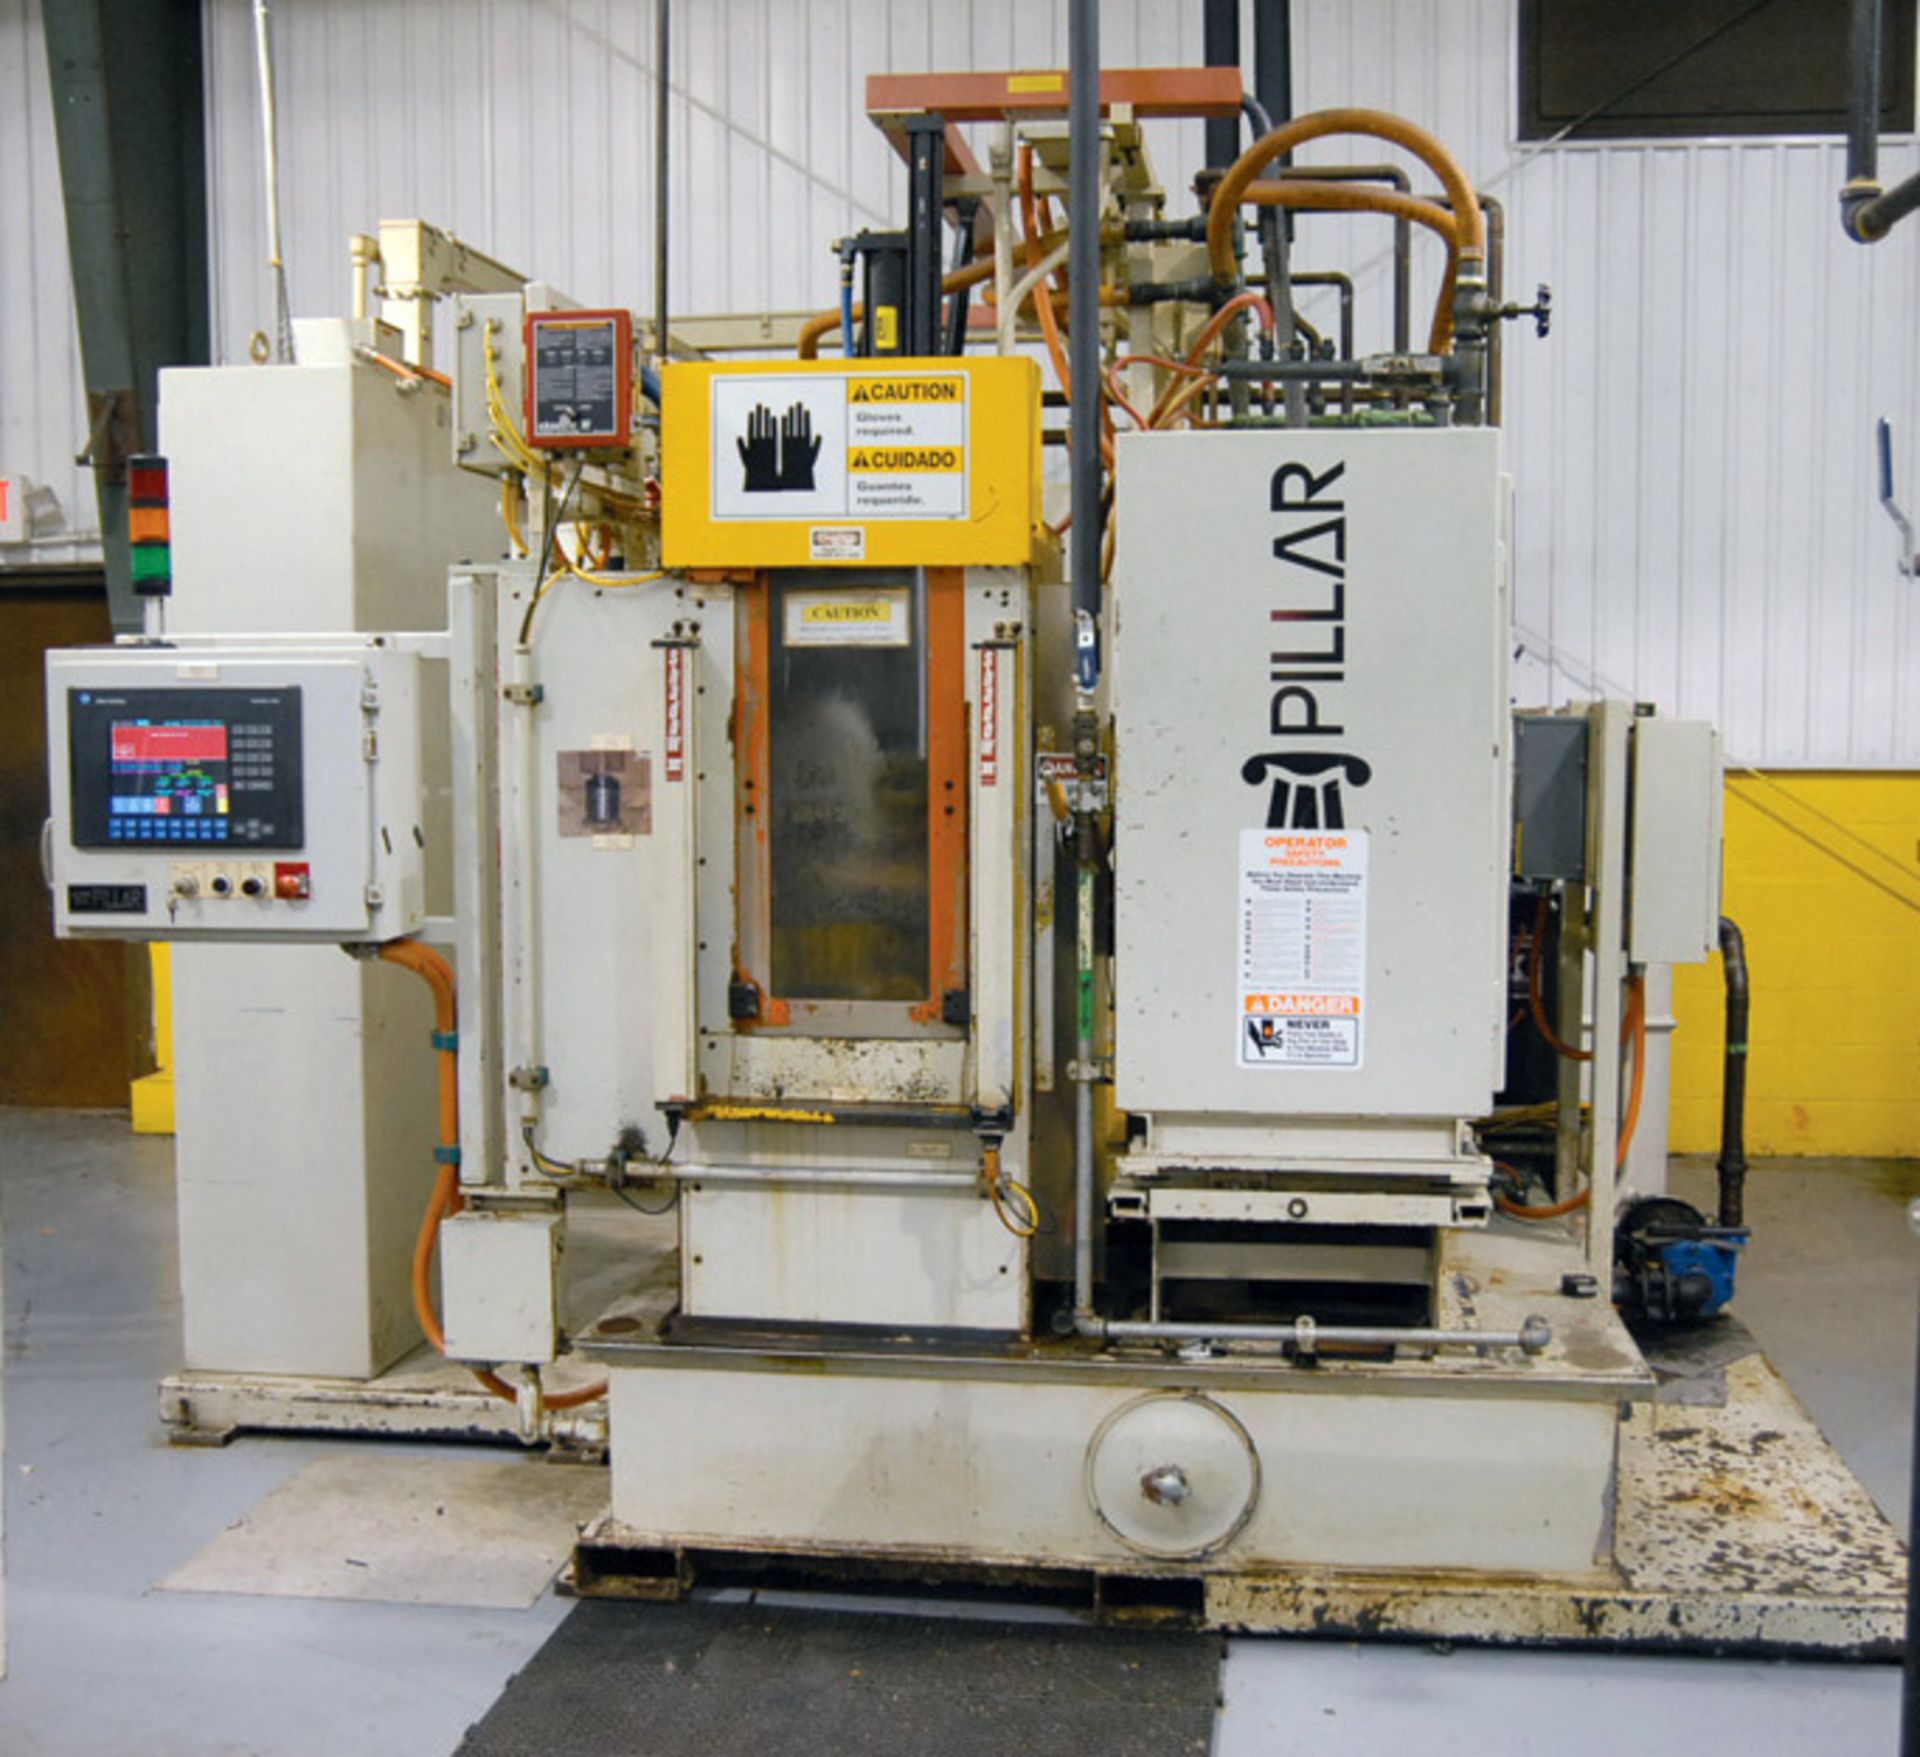 2000 Pillar Induction Heat Treat System, 50 KW, Mdl: AB7109- 503, S/N: S-0- 2920, Located In: